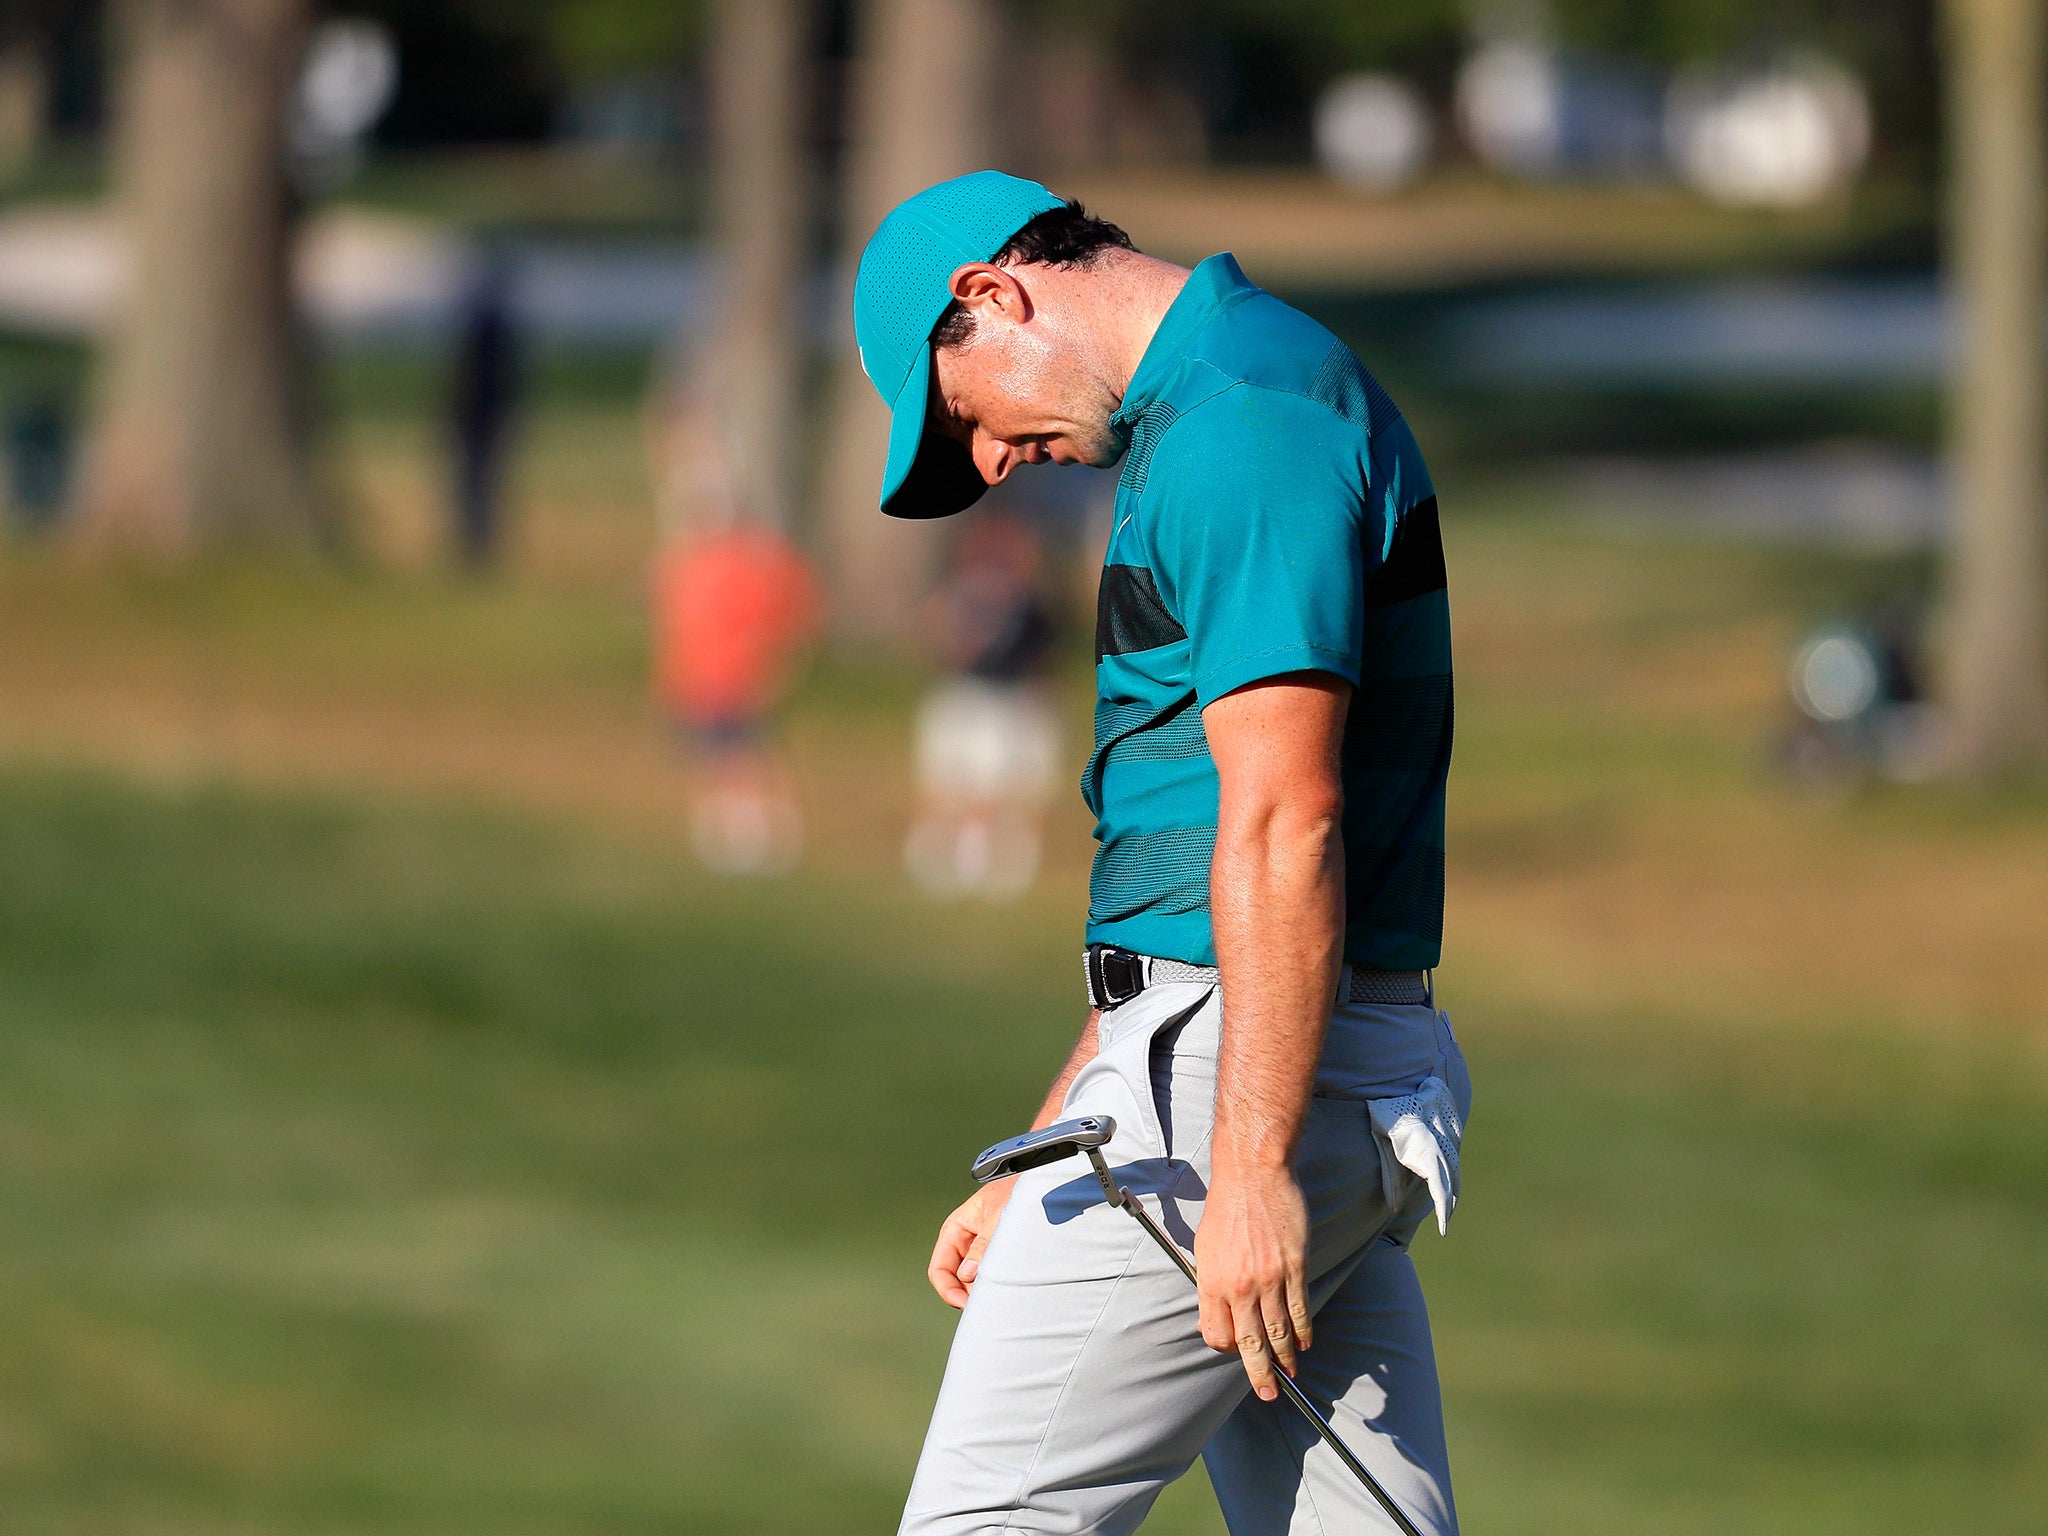 Rory McIlroy reacts to a missed birdie putt on 15